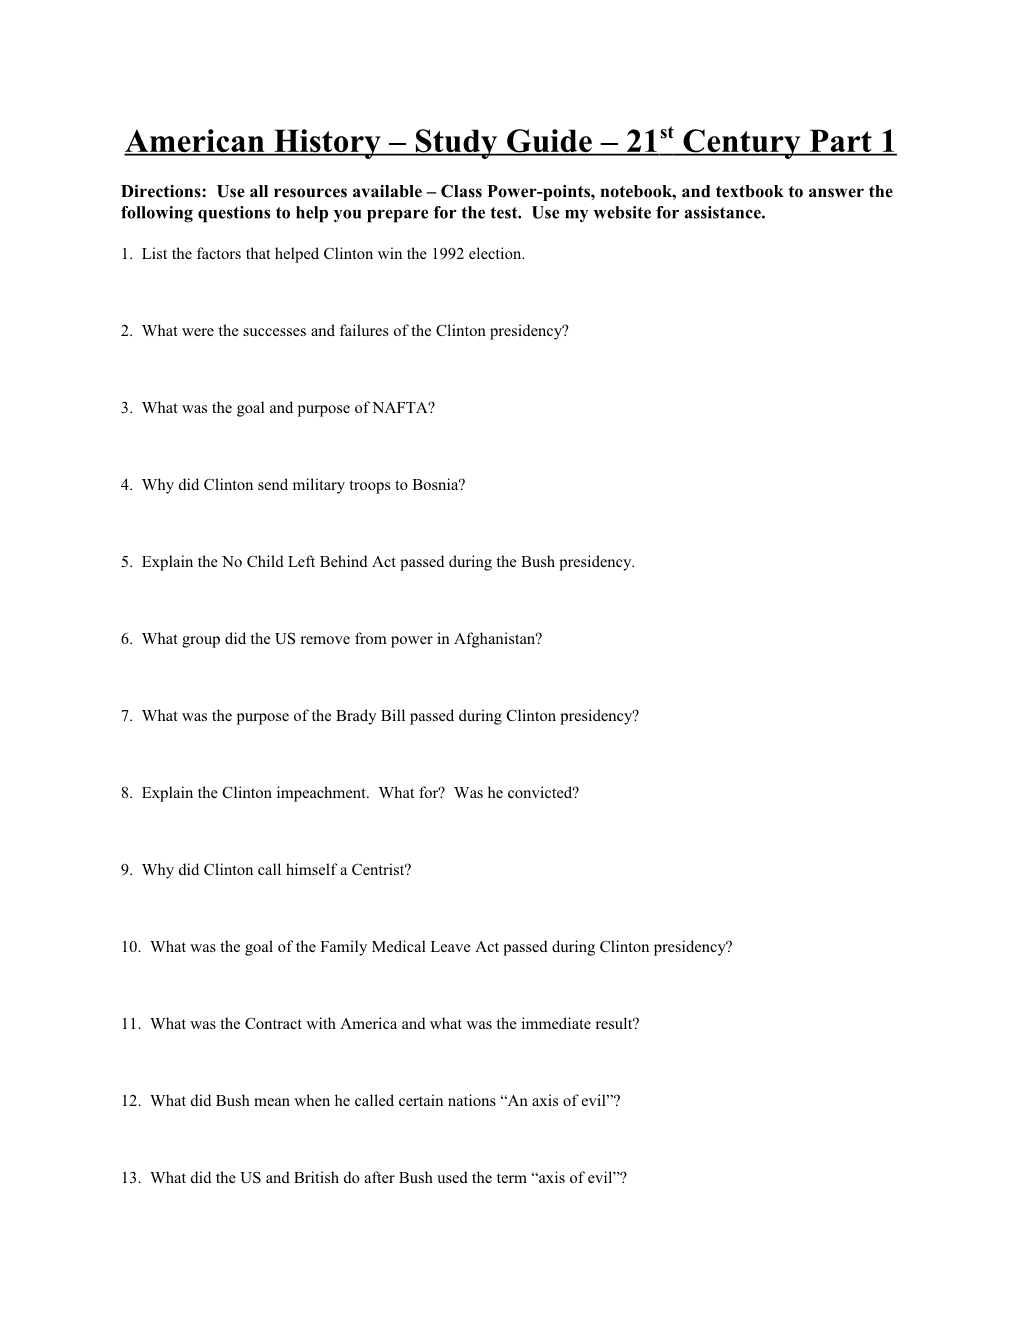 American History Study Guide 21St Century Part 1